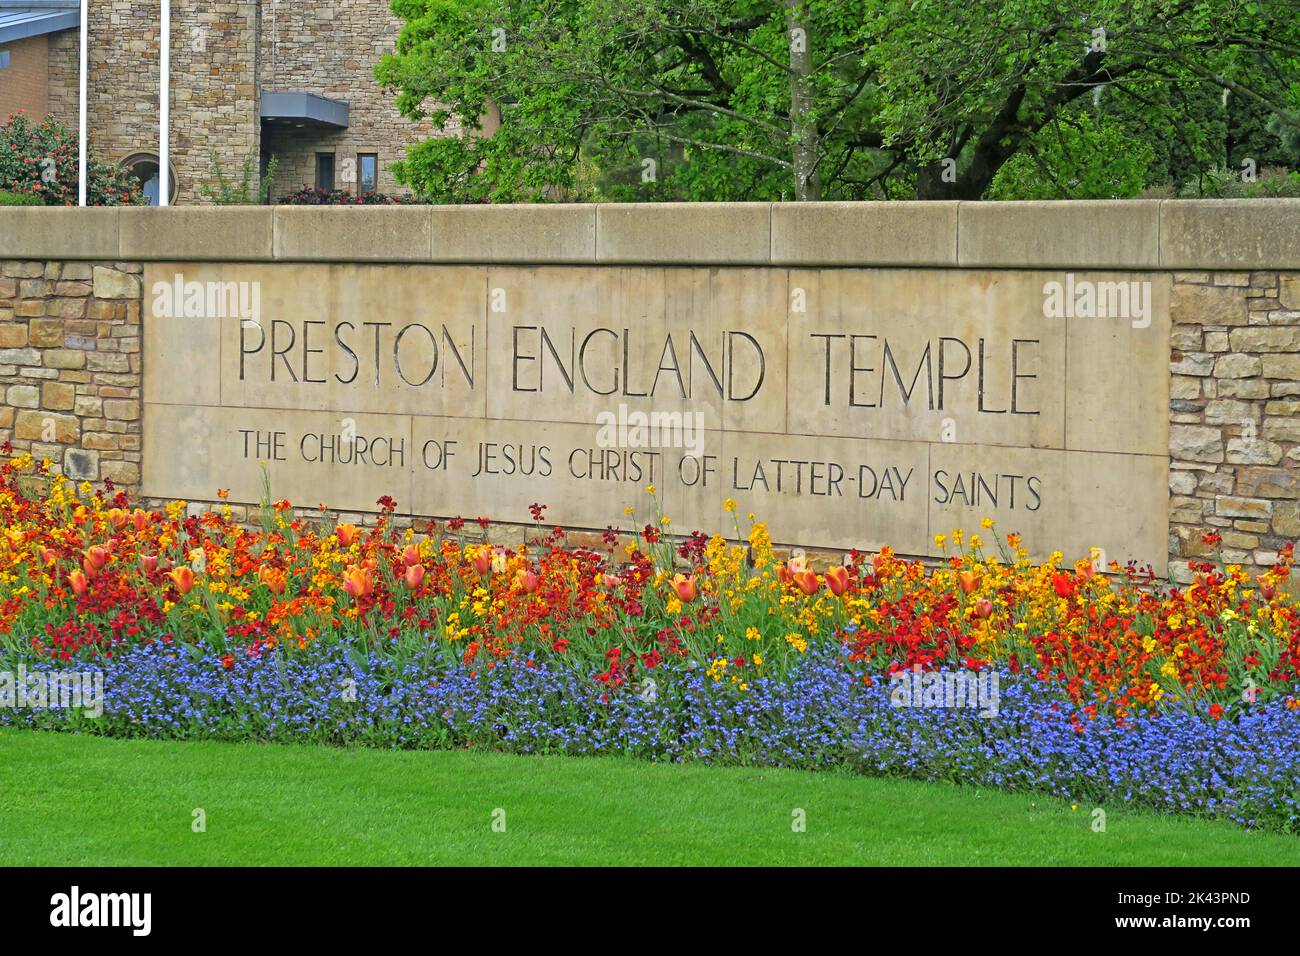 Preston England Temple, The Church of Jesus Christ of Latter Day Saints, Mormons in North West England, UK Stock Photo